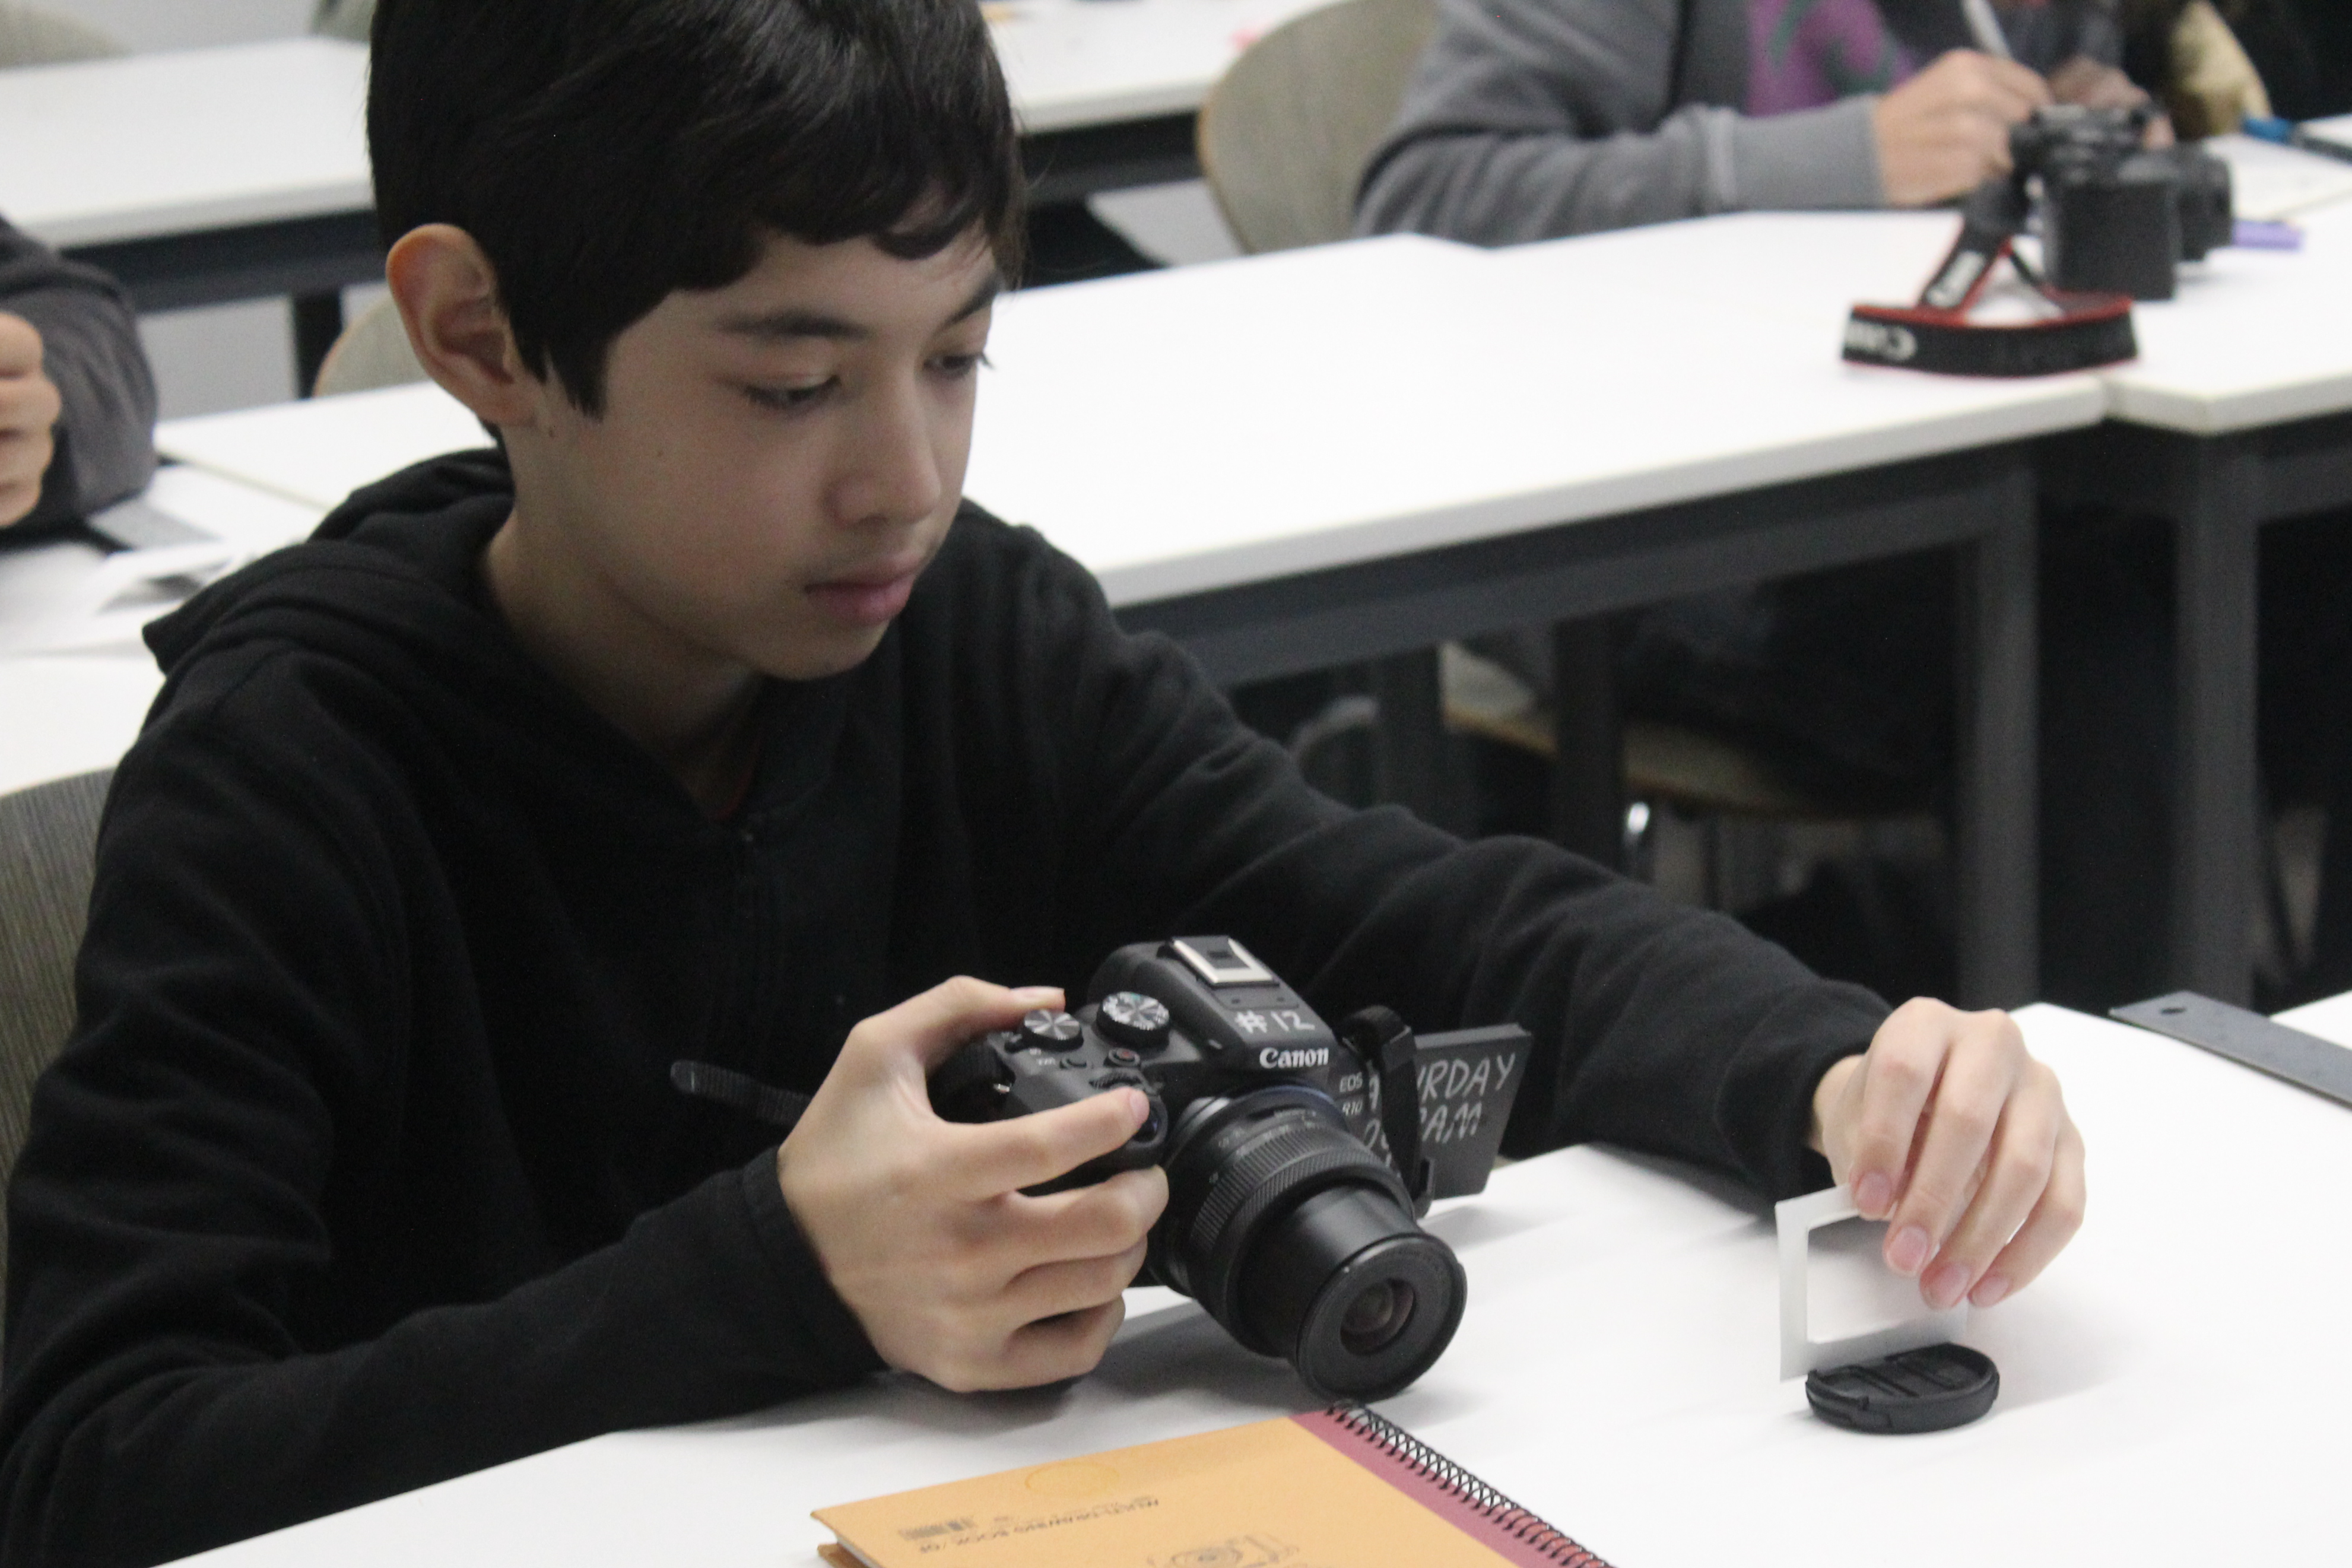 Student exploring their camera in the Media Production class.